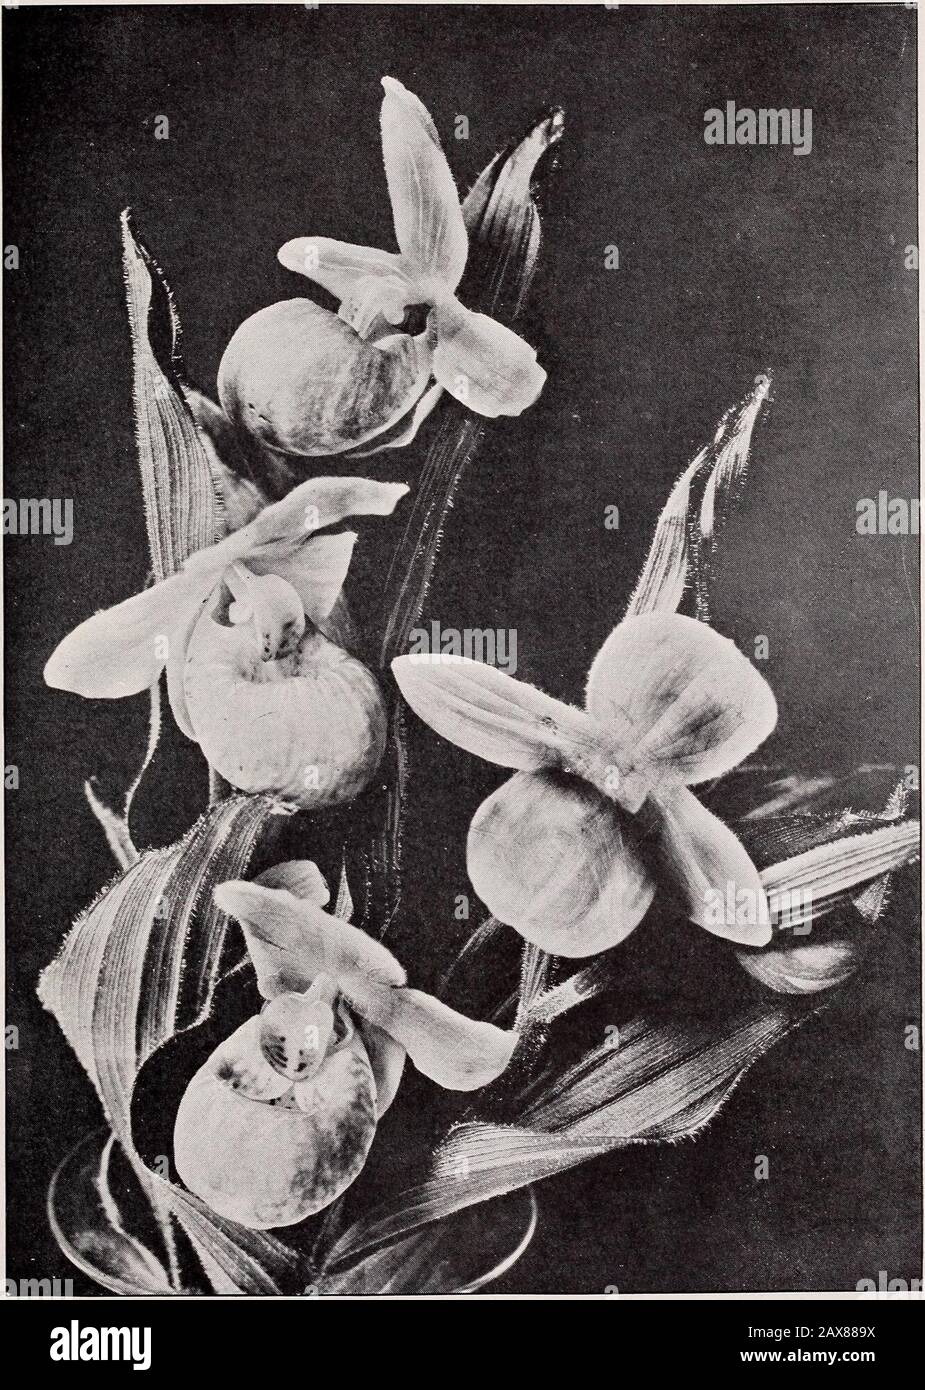 Horsford's Nurseries . ghtful fragrance. X., 8 cts. each, 50cts. per doz.; P., 9 cts. each, 55 cts. per doz. TRITONIA (Montbretia) crocosmiaeflora. One of most floriferous of summer-flowering bulbs.Flowers orange-scarlet; very pretty. Augustand September. X., 5 cts. each, 20 cts. per doz.;P., 6 cts. each, 25 cts. per doz., $1 per 100. TIGRIDLA. Tiger-flower. Xatives of Mexicoand South America. Very striking showyflowers from bulbous roots, blooming in Julyand August. The flowers last only a day, butcome in continuous succession over quite aperiod. The bulbs are tender and should be dugbefore t Stock Photo